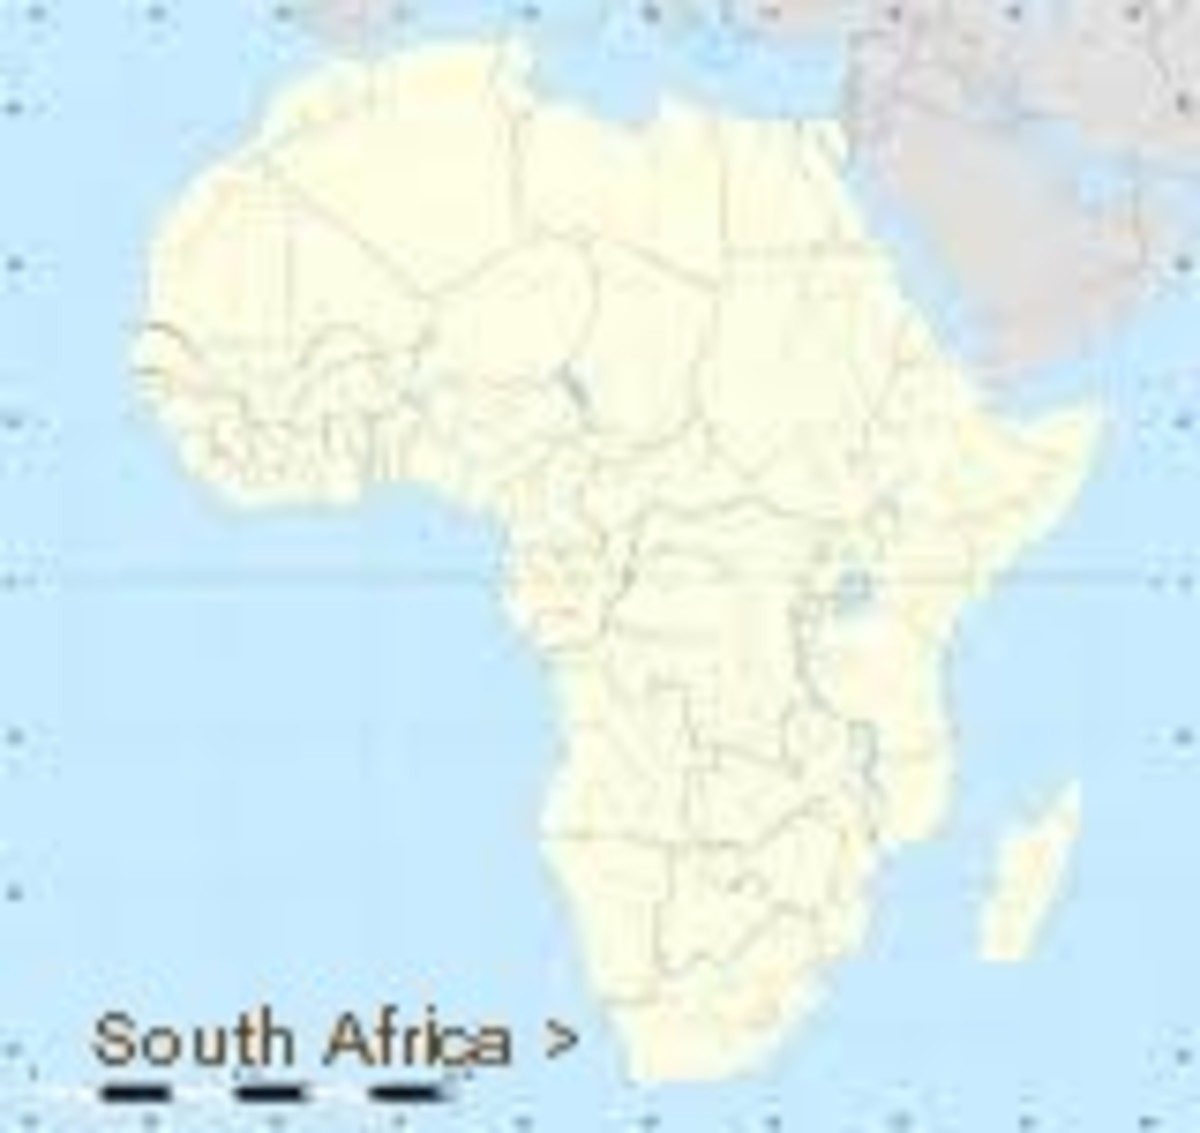 disasters-in-south-africa-in-relation-to-water